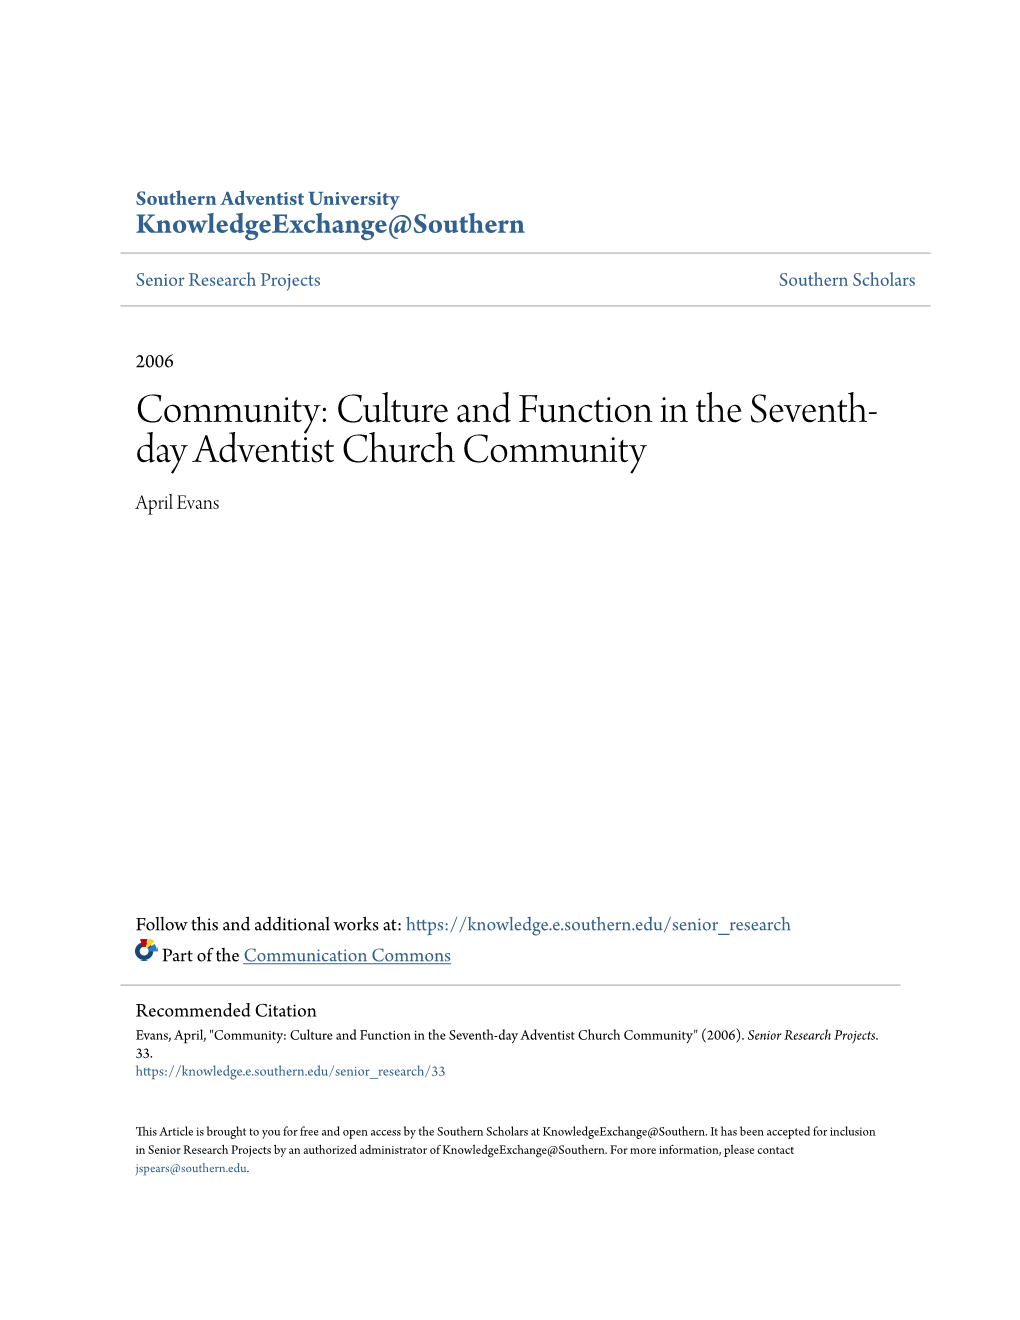 Community: Culture and Function in the Seventh-Day Adventist Church Community" (2006)